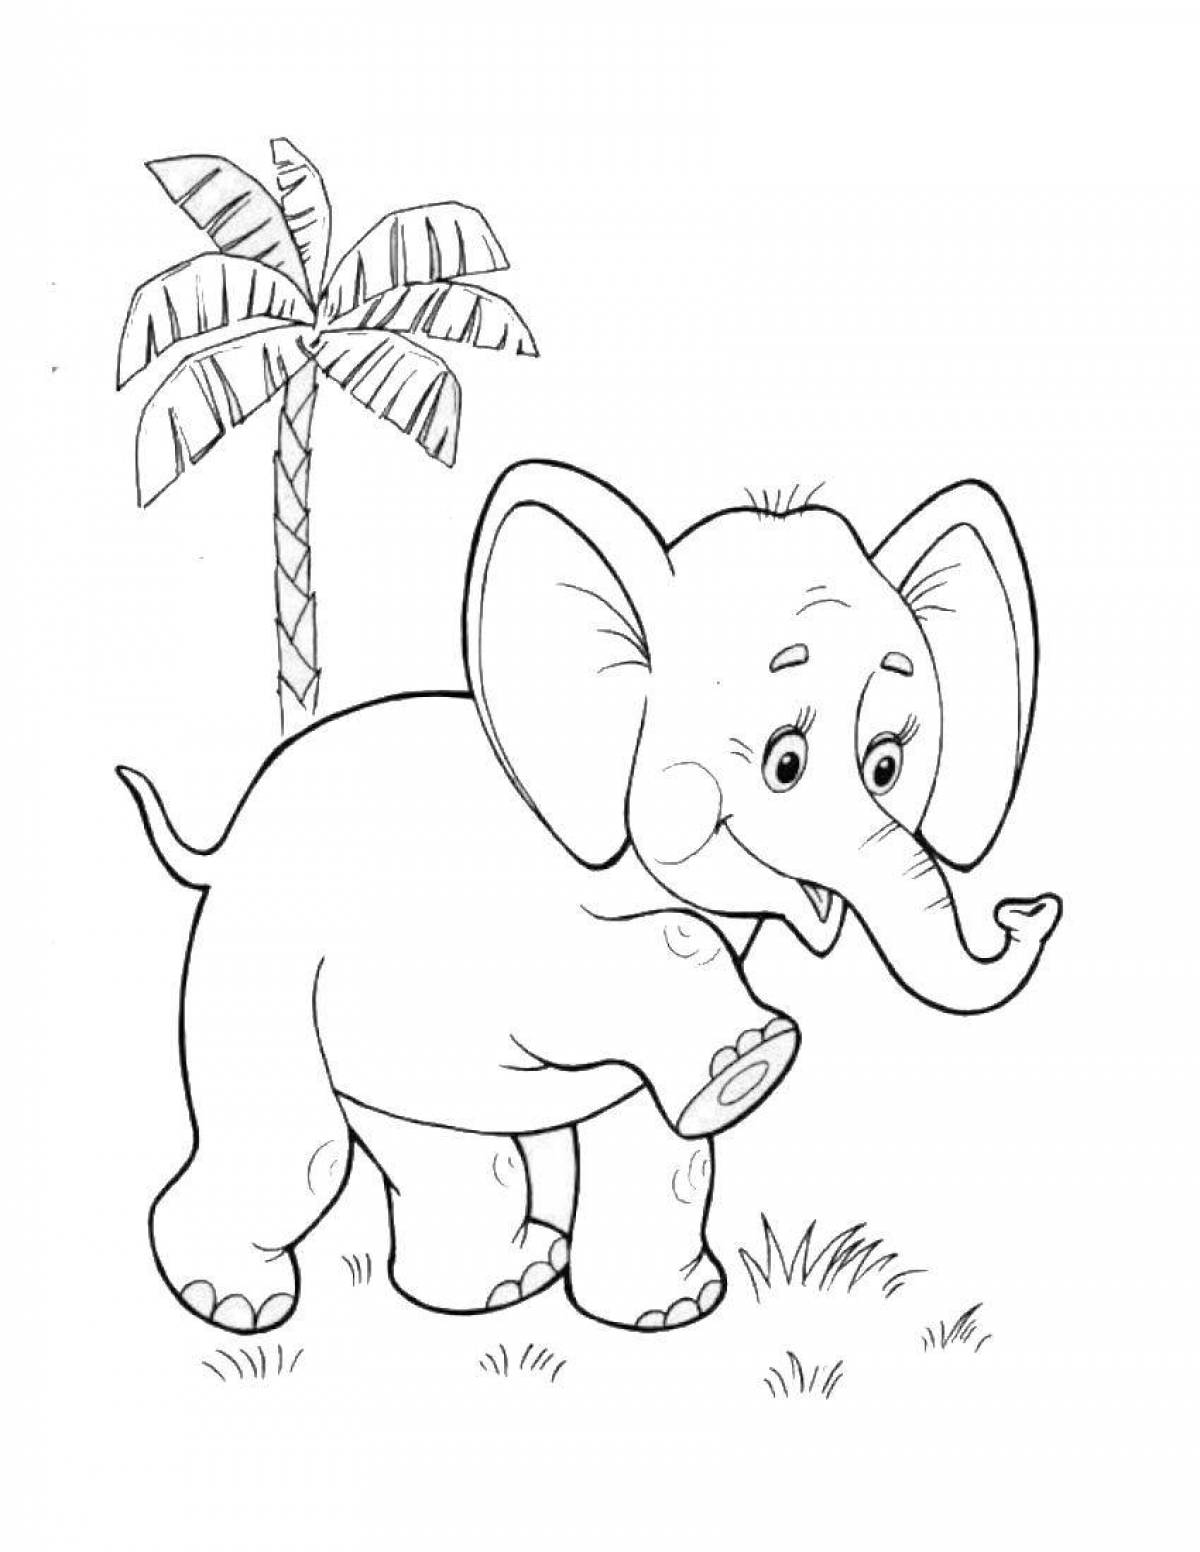 Exotic coloring pages for children 7 years old animals of hot countries